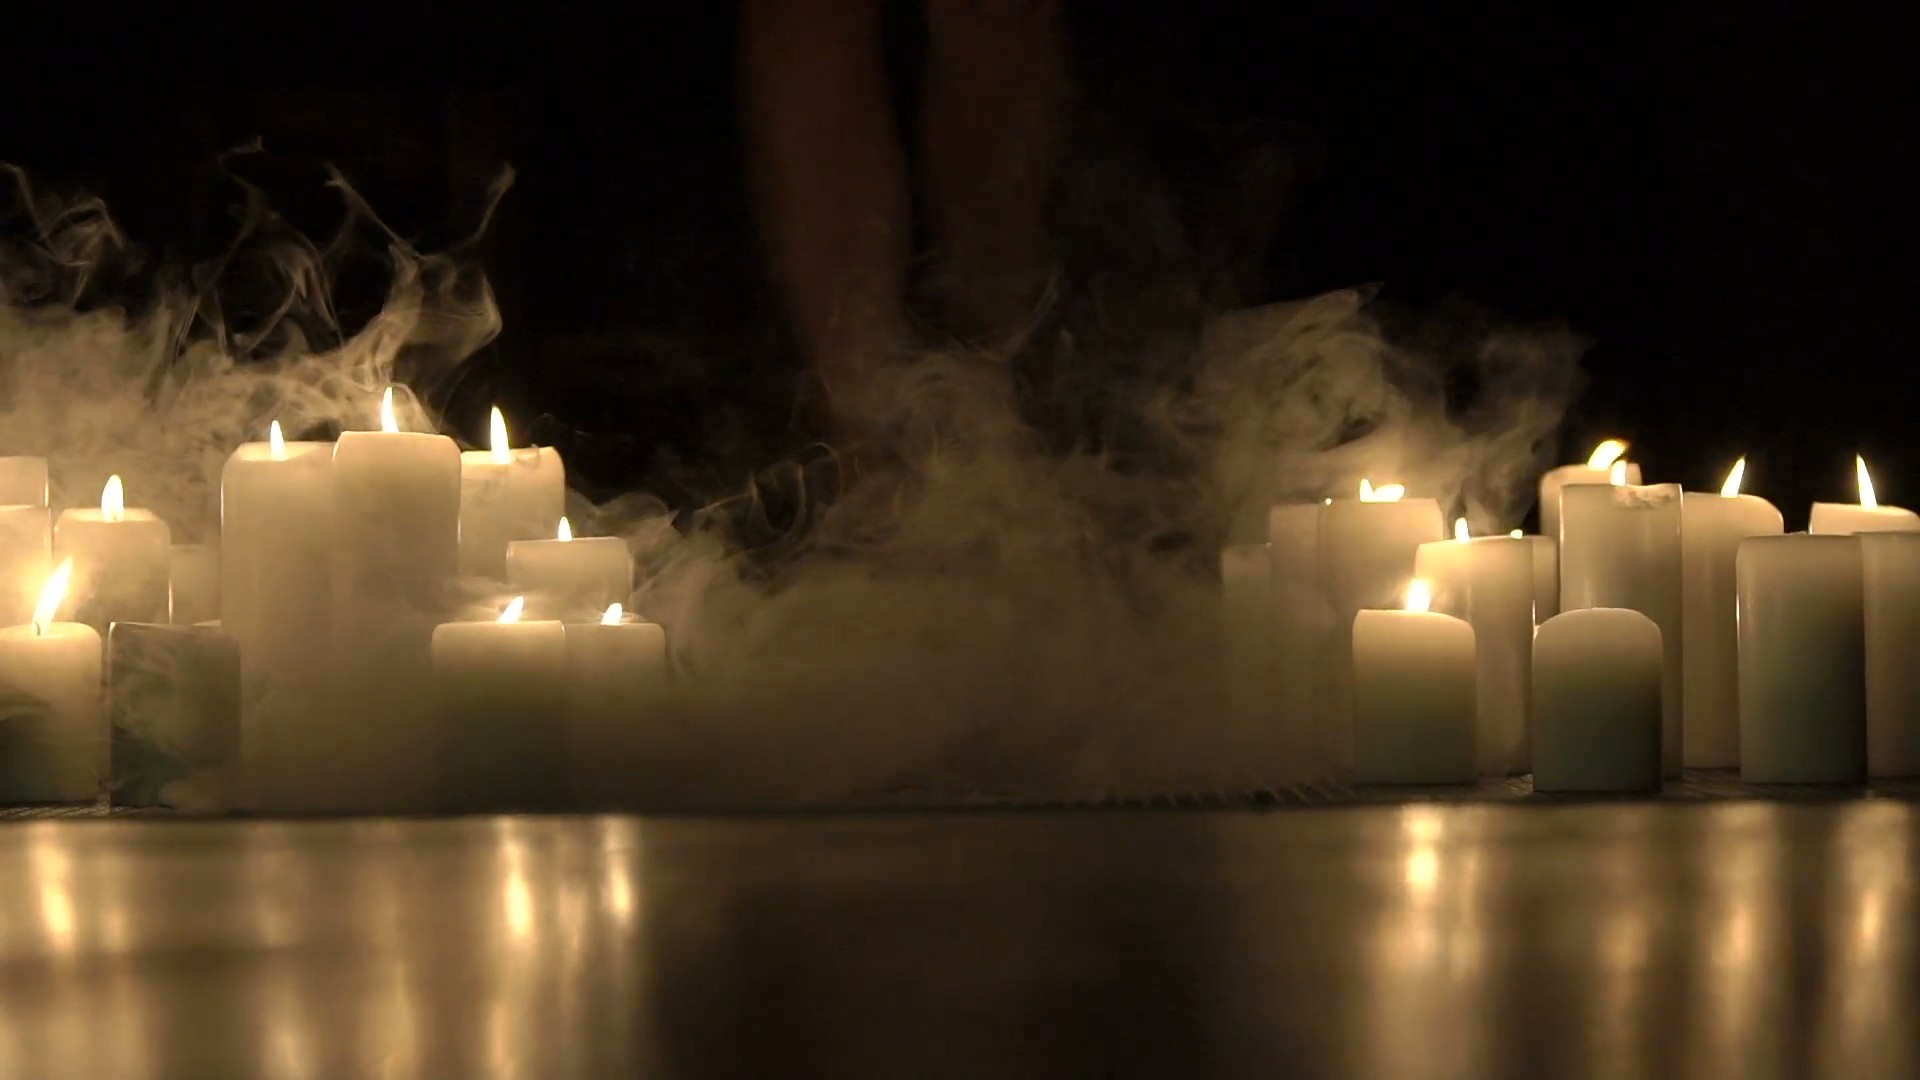 Dark Candles Girl S Legs Goes In Big Smoke Of Burning - Burning Candles And Smoke , HD Wallpaper & Backgrounds